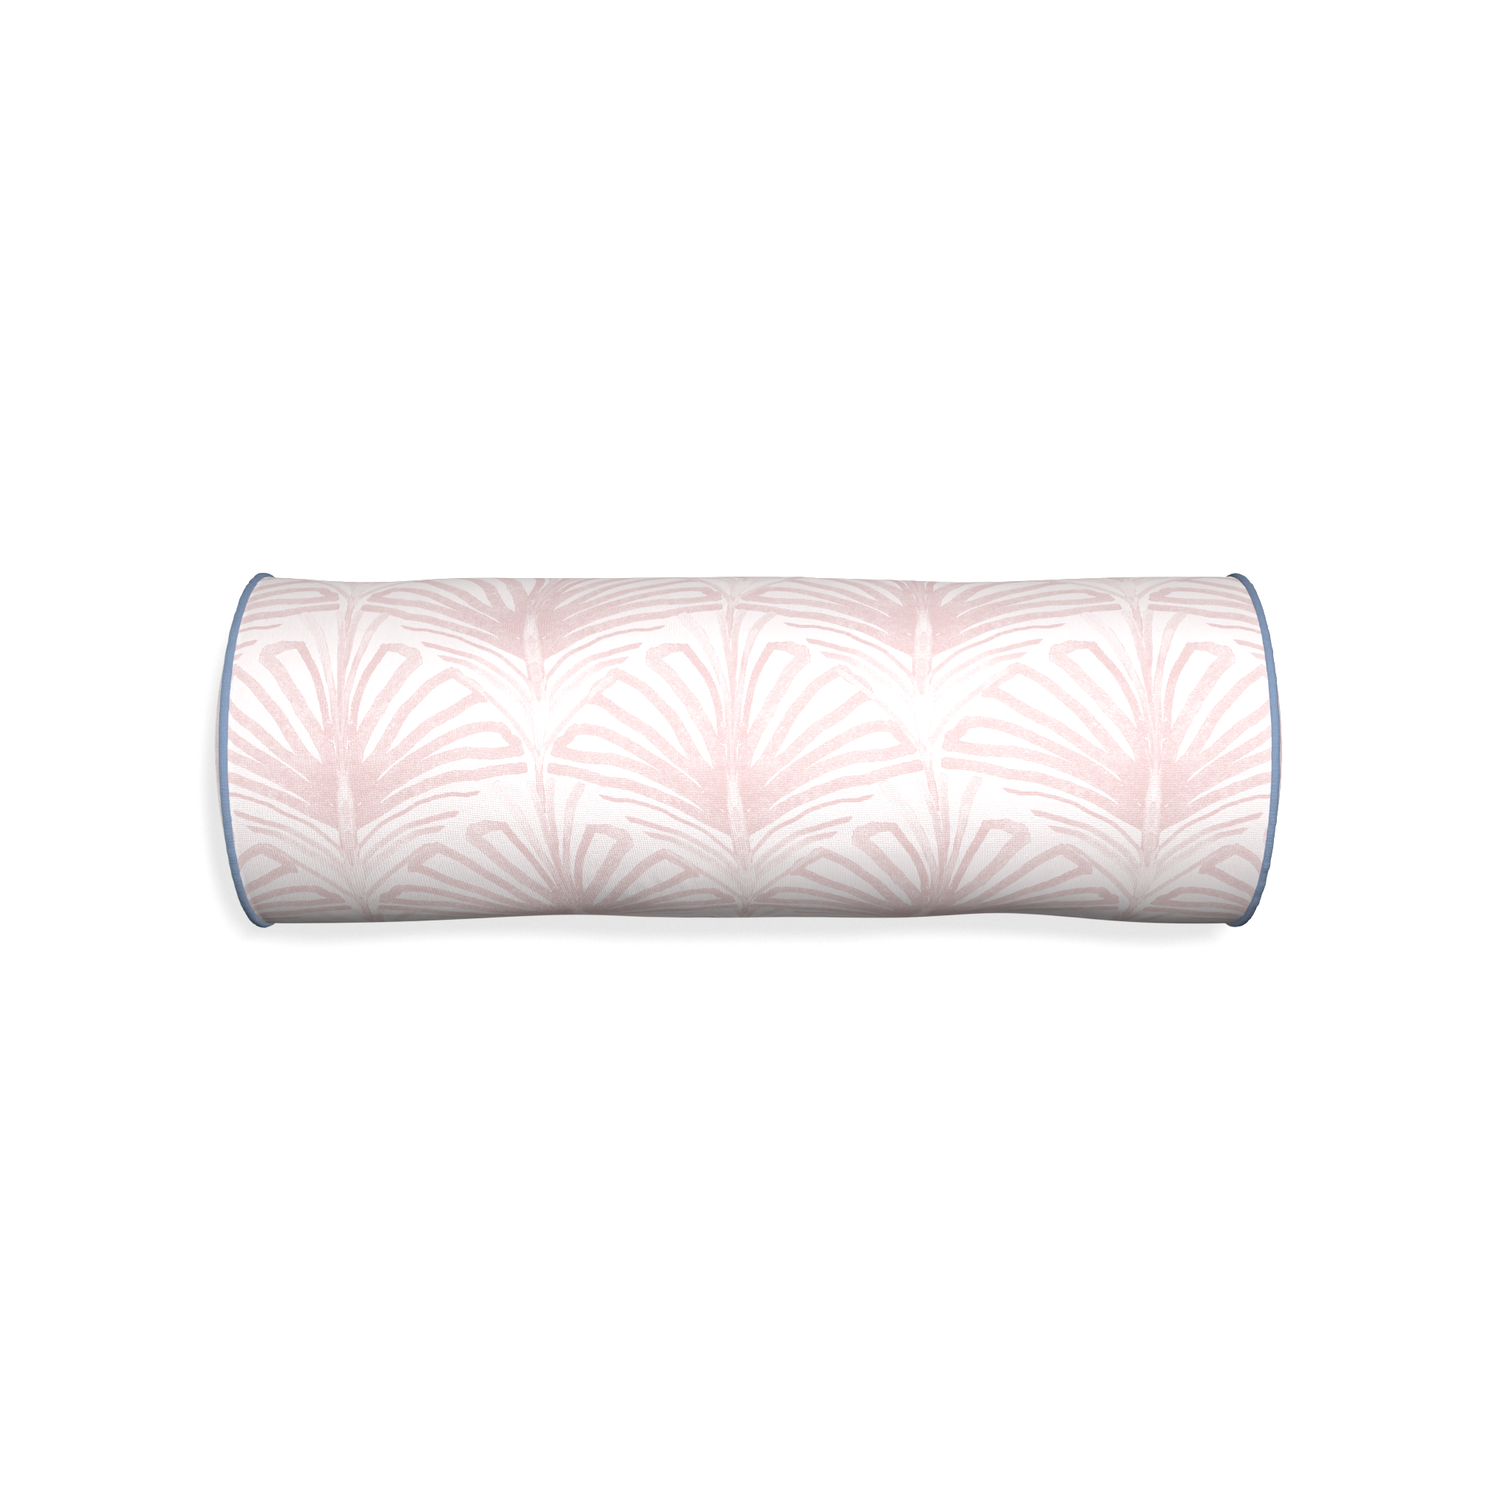 Bolster suzy rose custom pillow with sky piping on white background